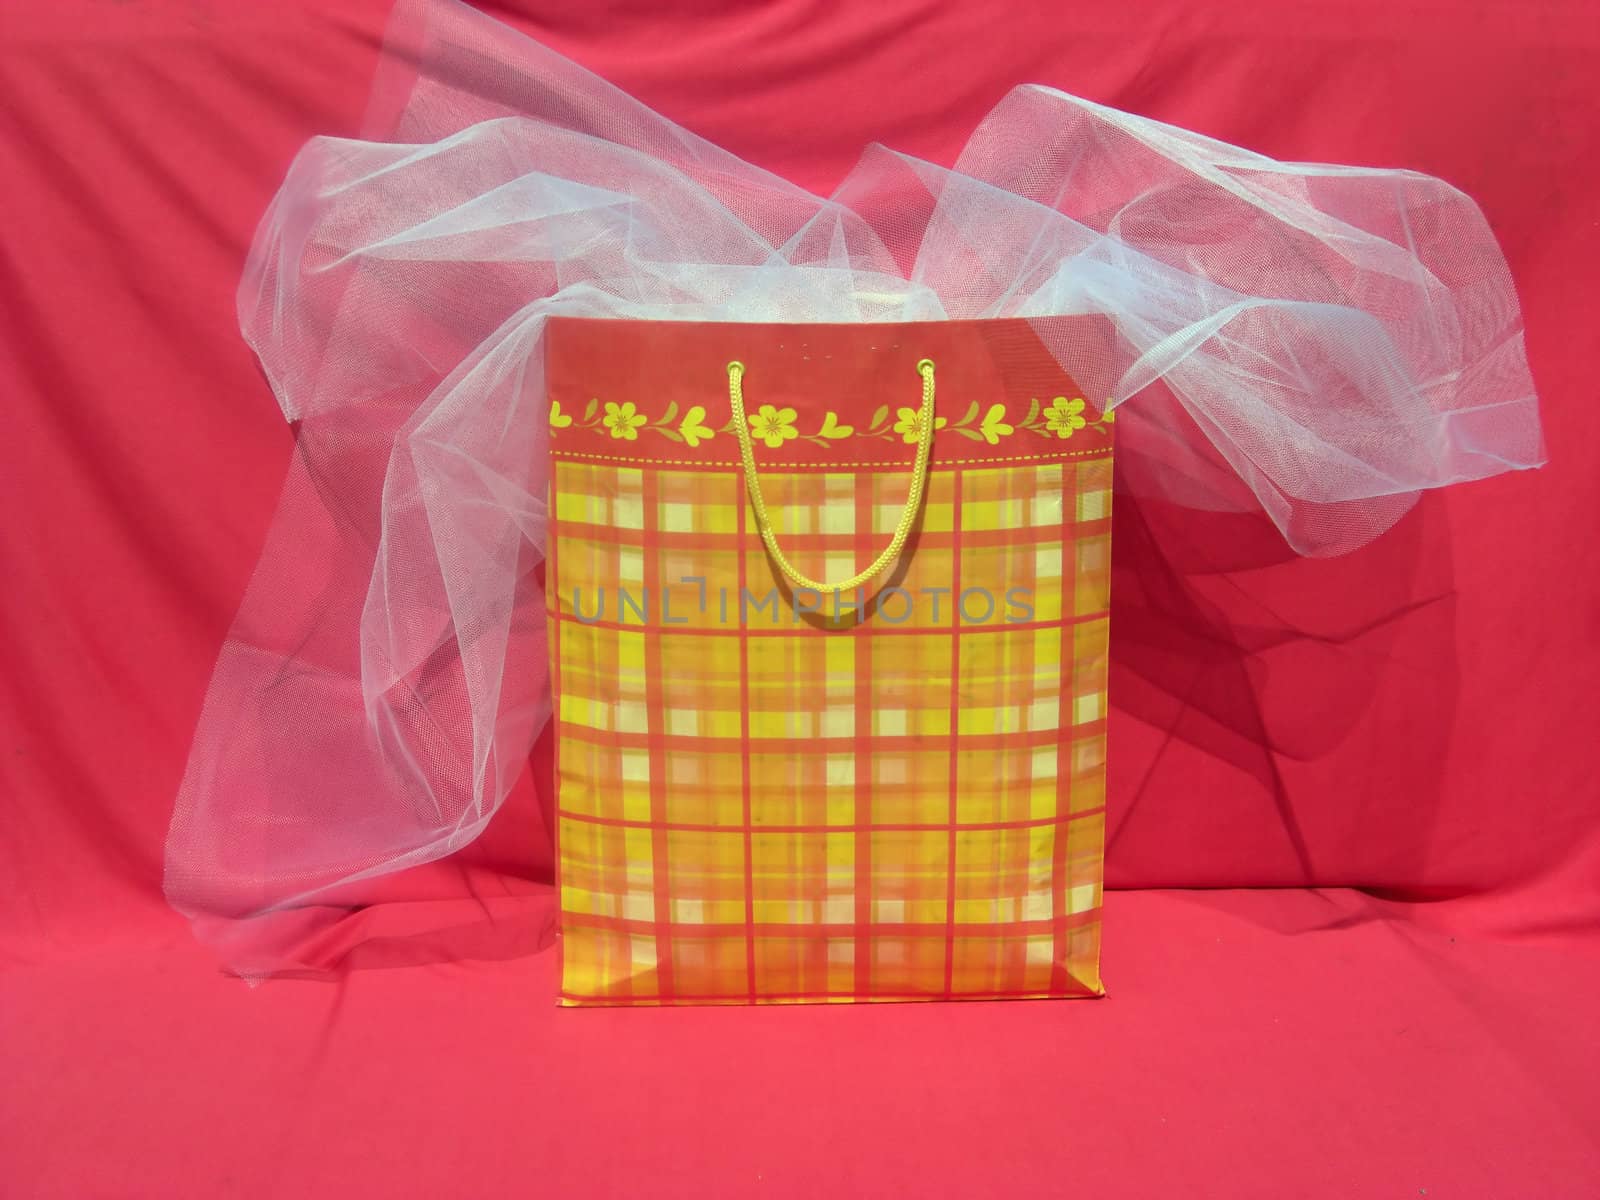 A colorful and large shopping bag is sitting on a cloth and a white veil is overlapping.